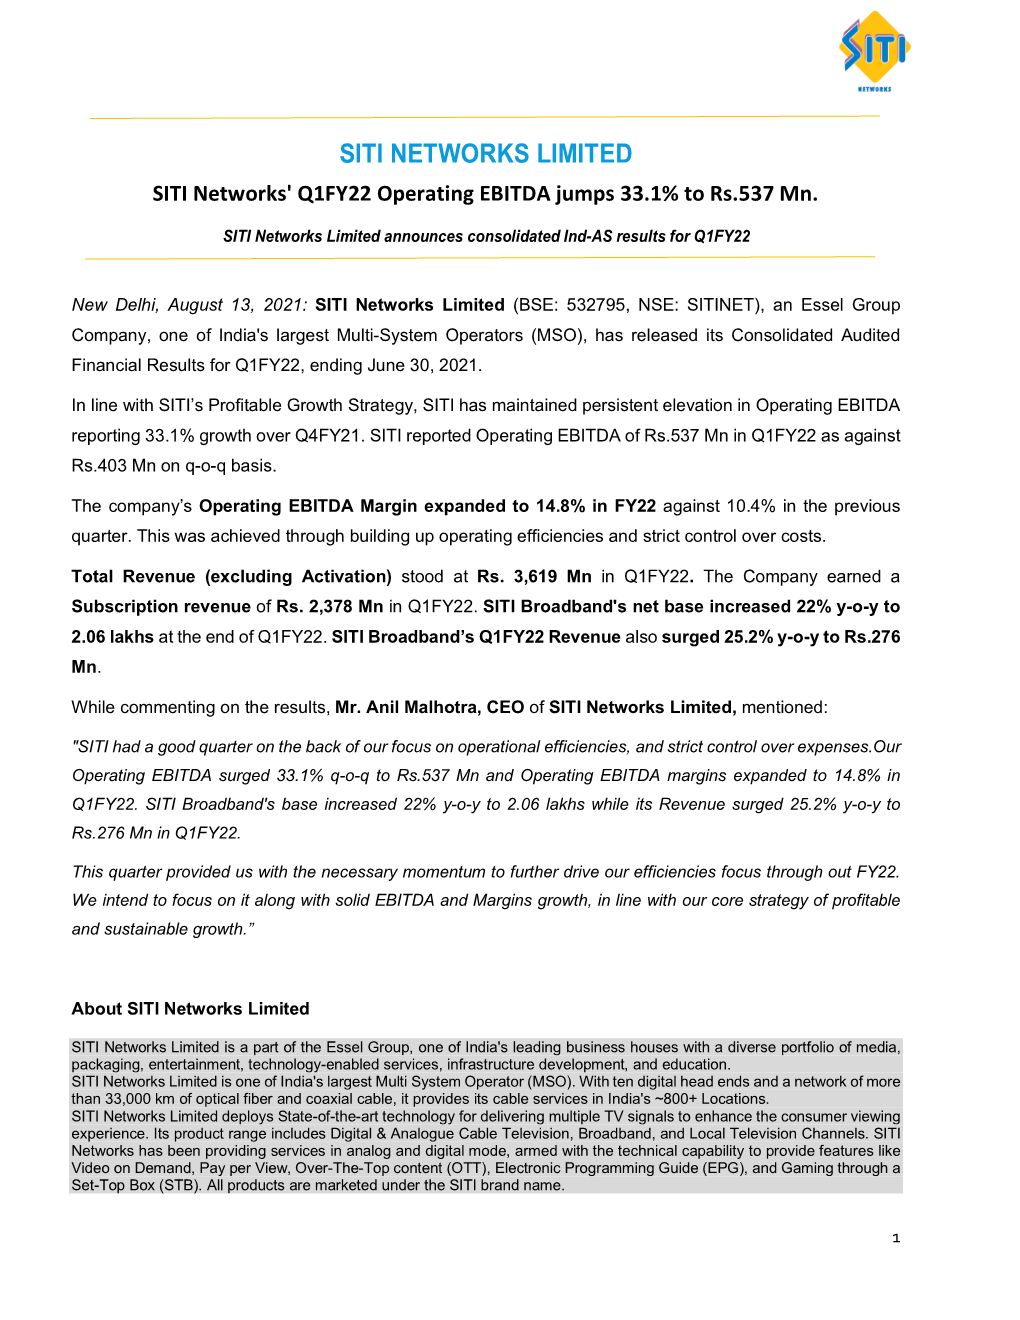 SITI NETWORKS LIMITED SITI Networks' Q1FY22 Operating EBITDA Jumps 33.1% to Rs.537 Mn